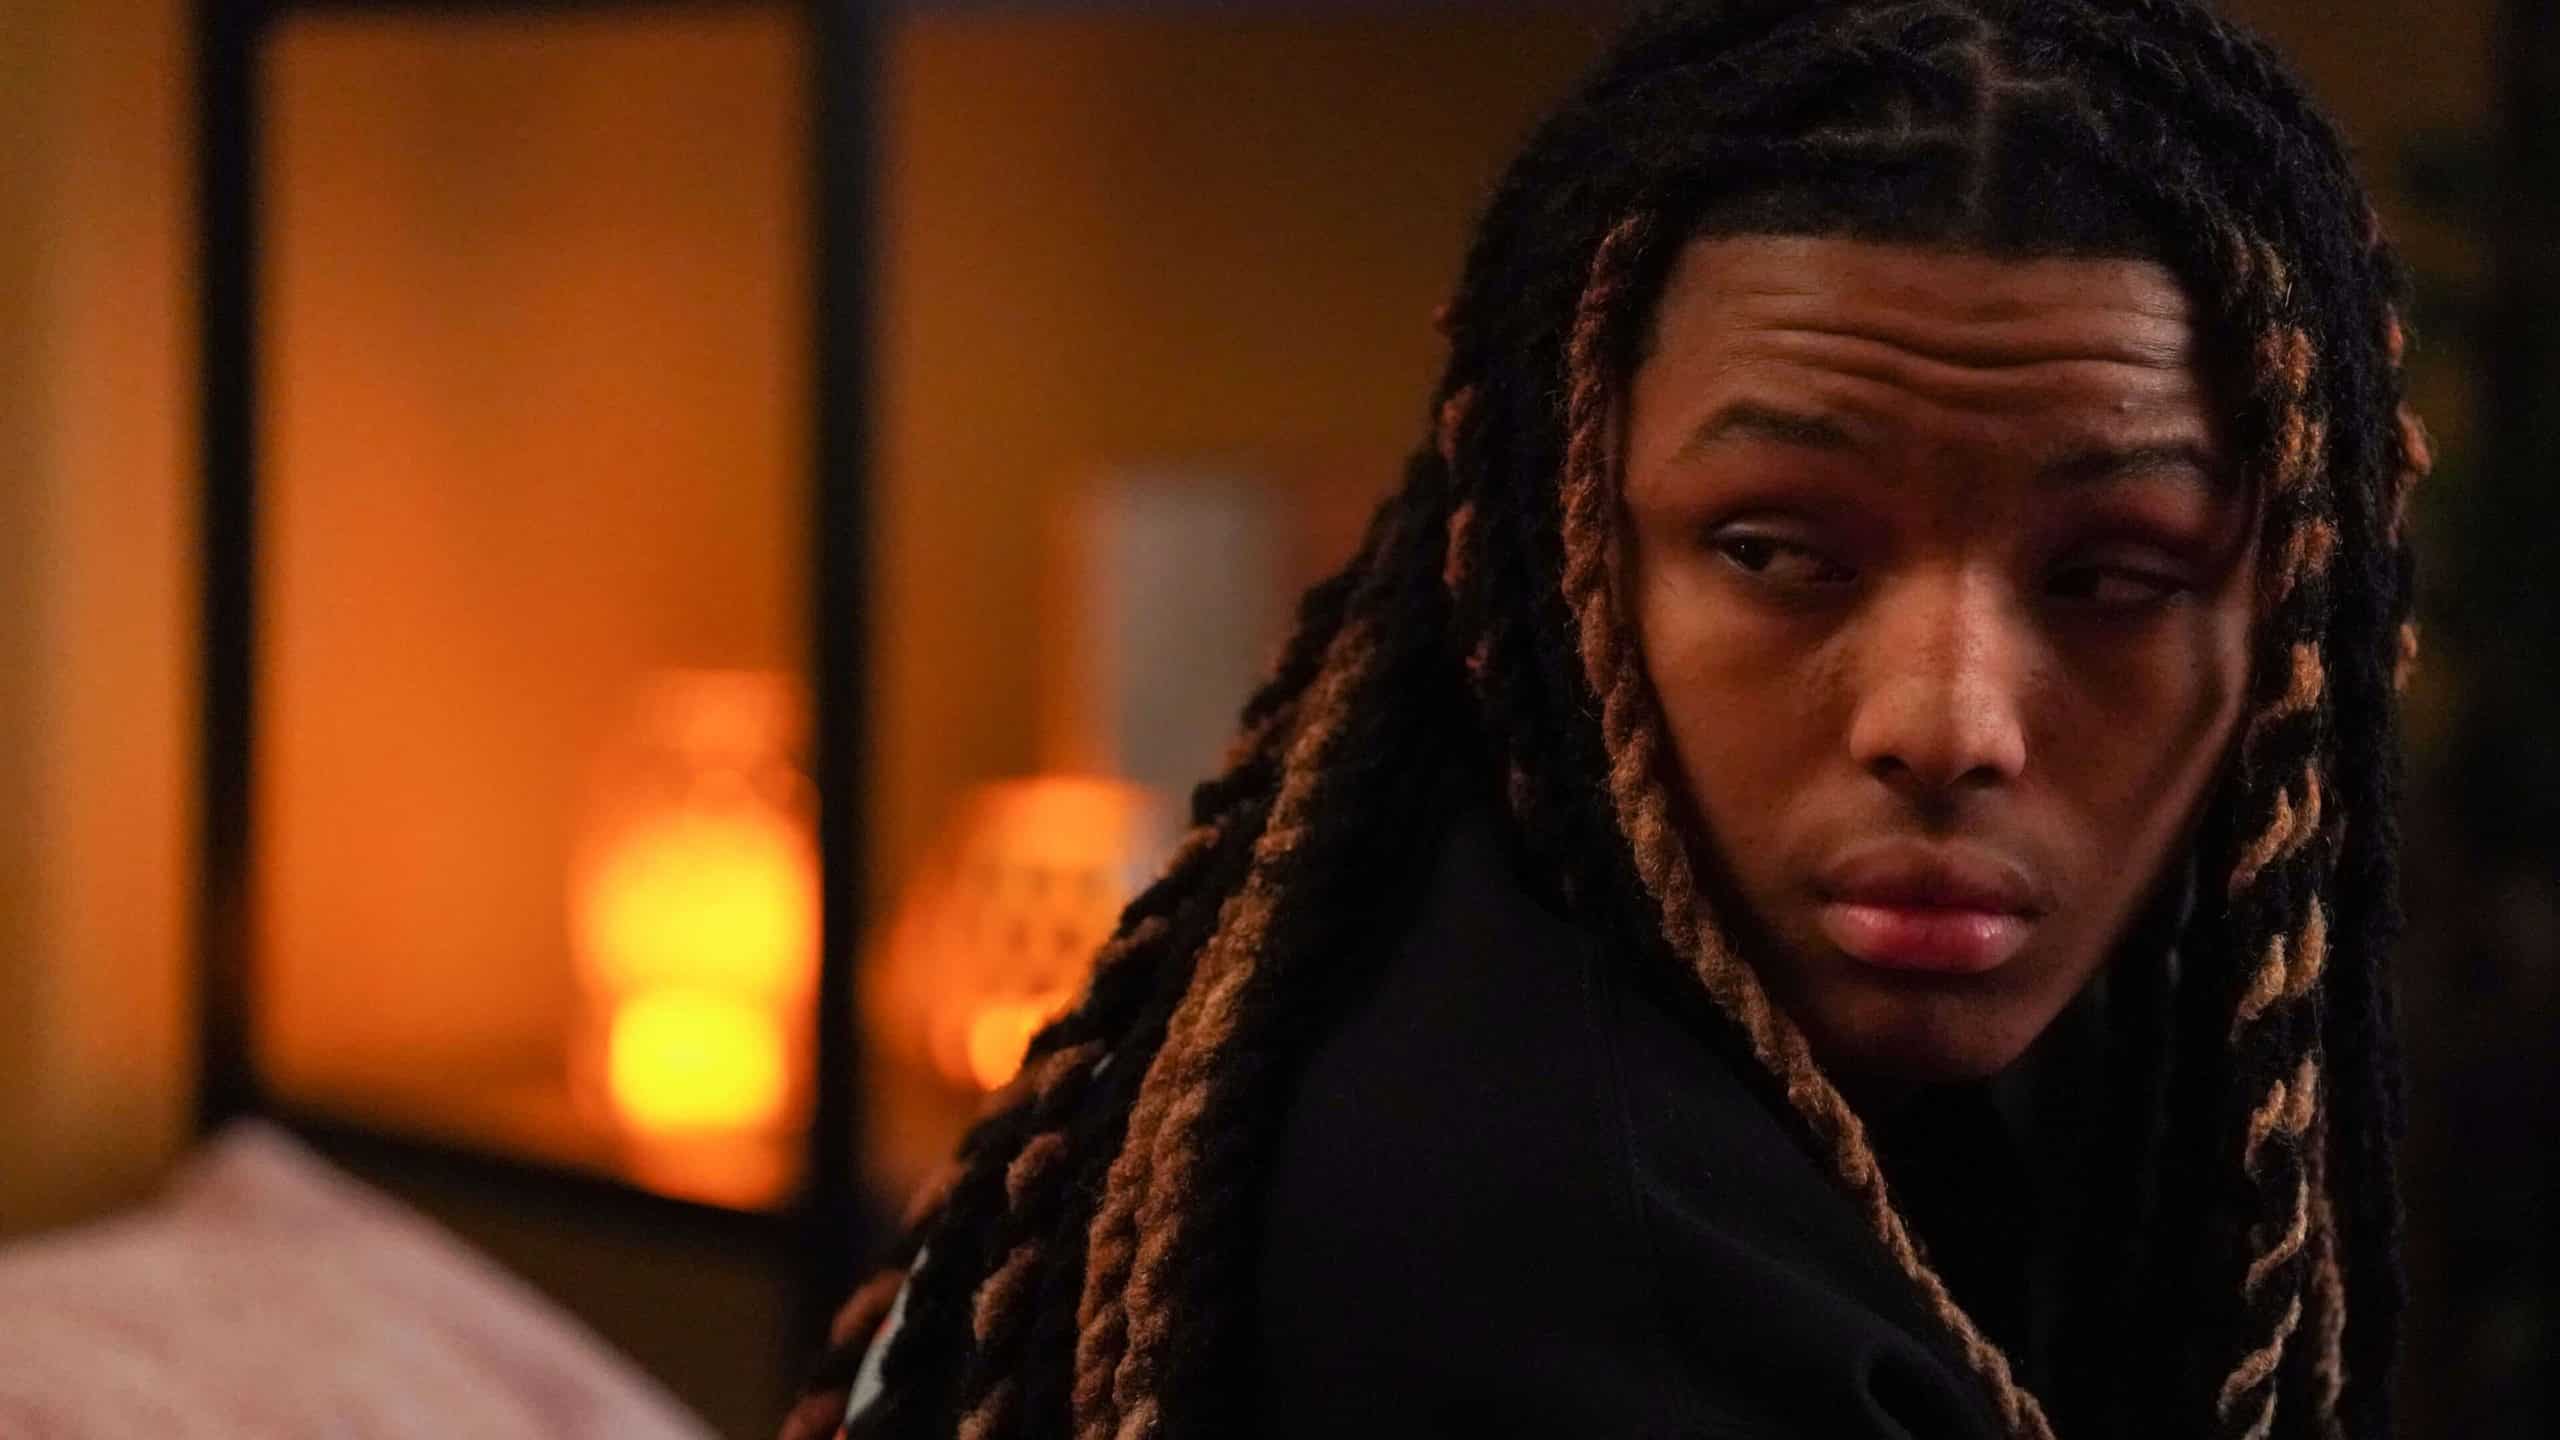 The Chi Season 5 Episode 5 Recap "We Don’t Have To Take Our Clothes Off